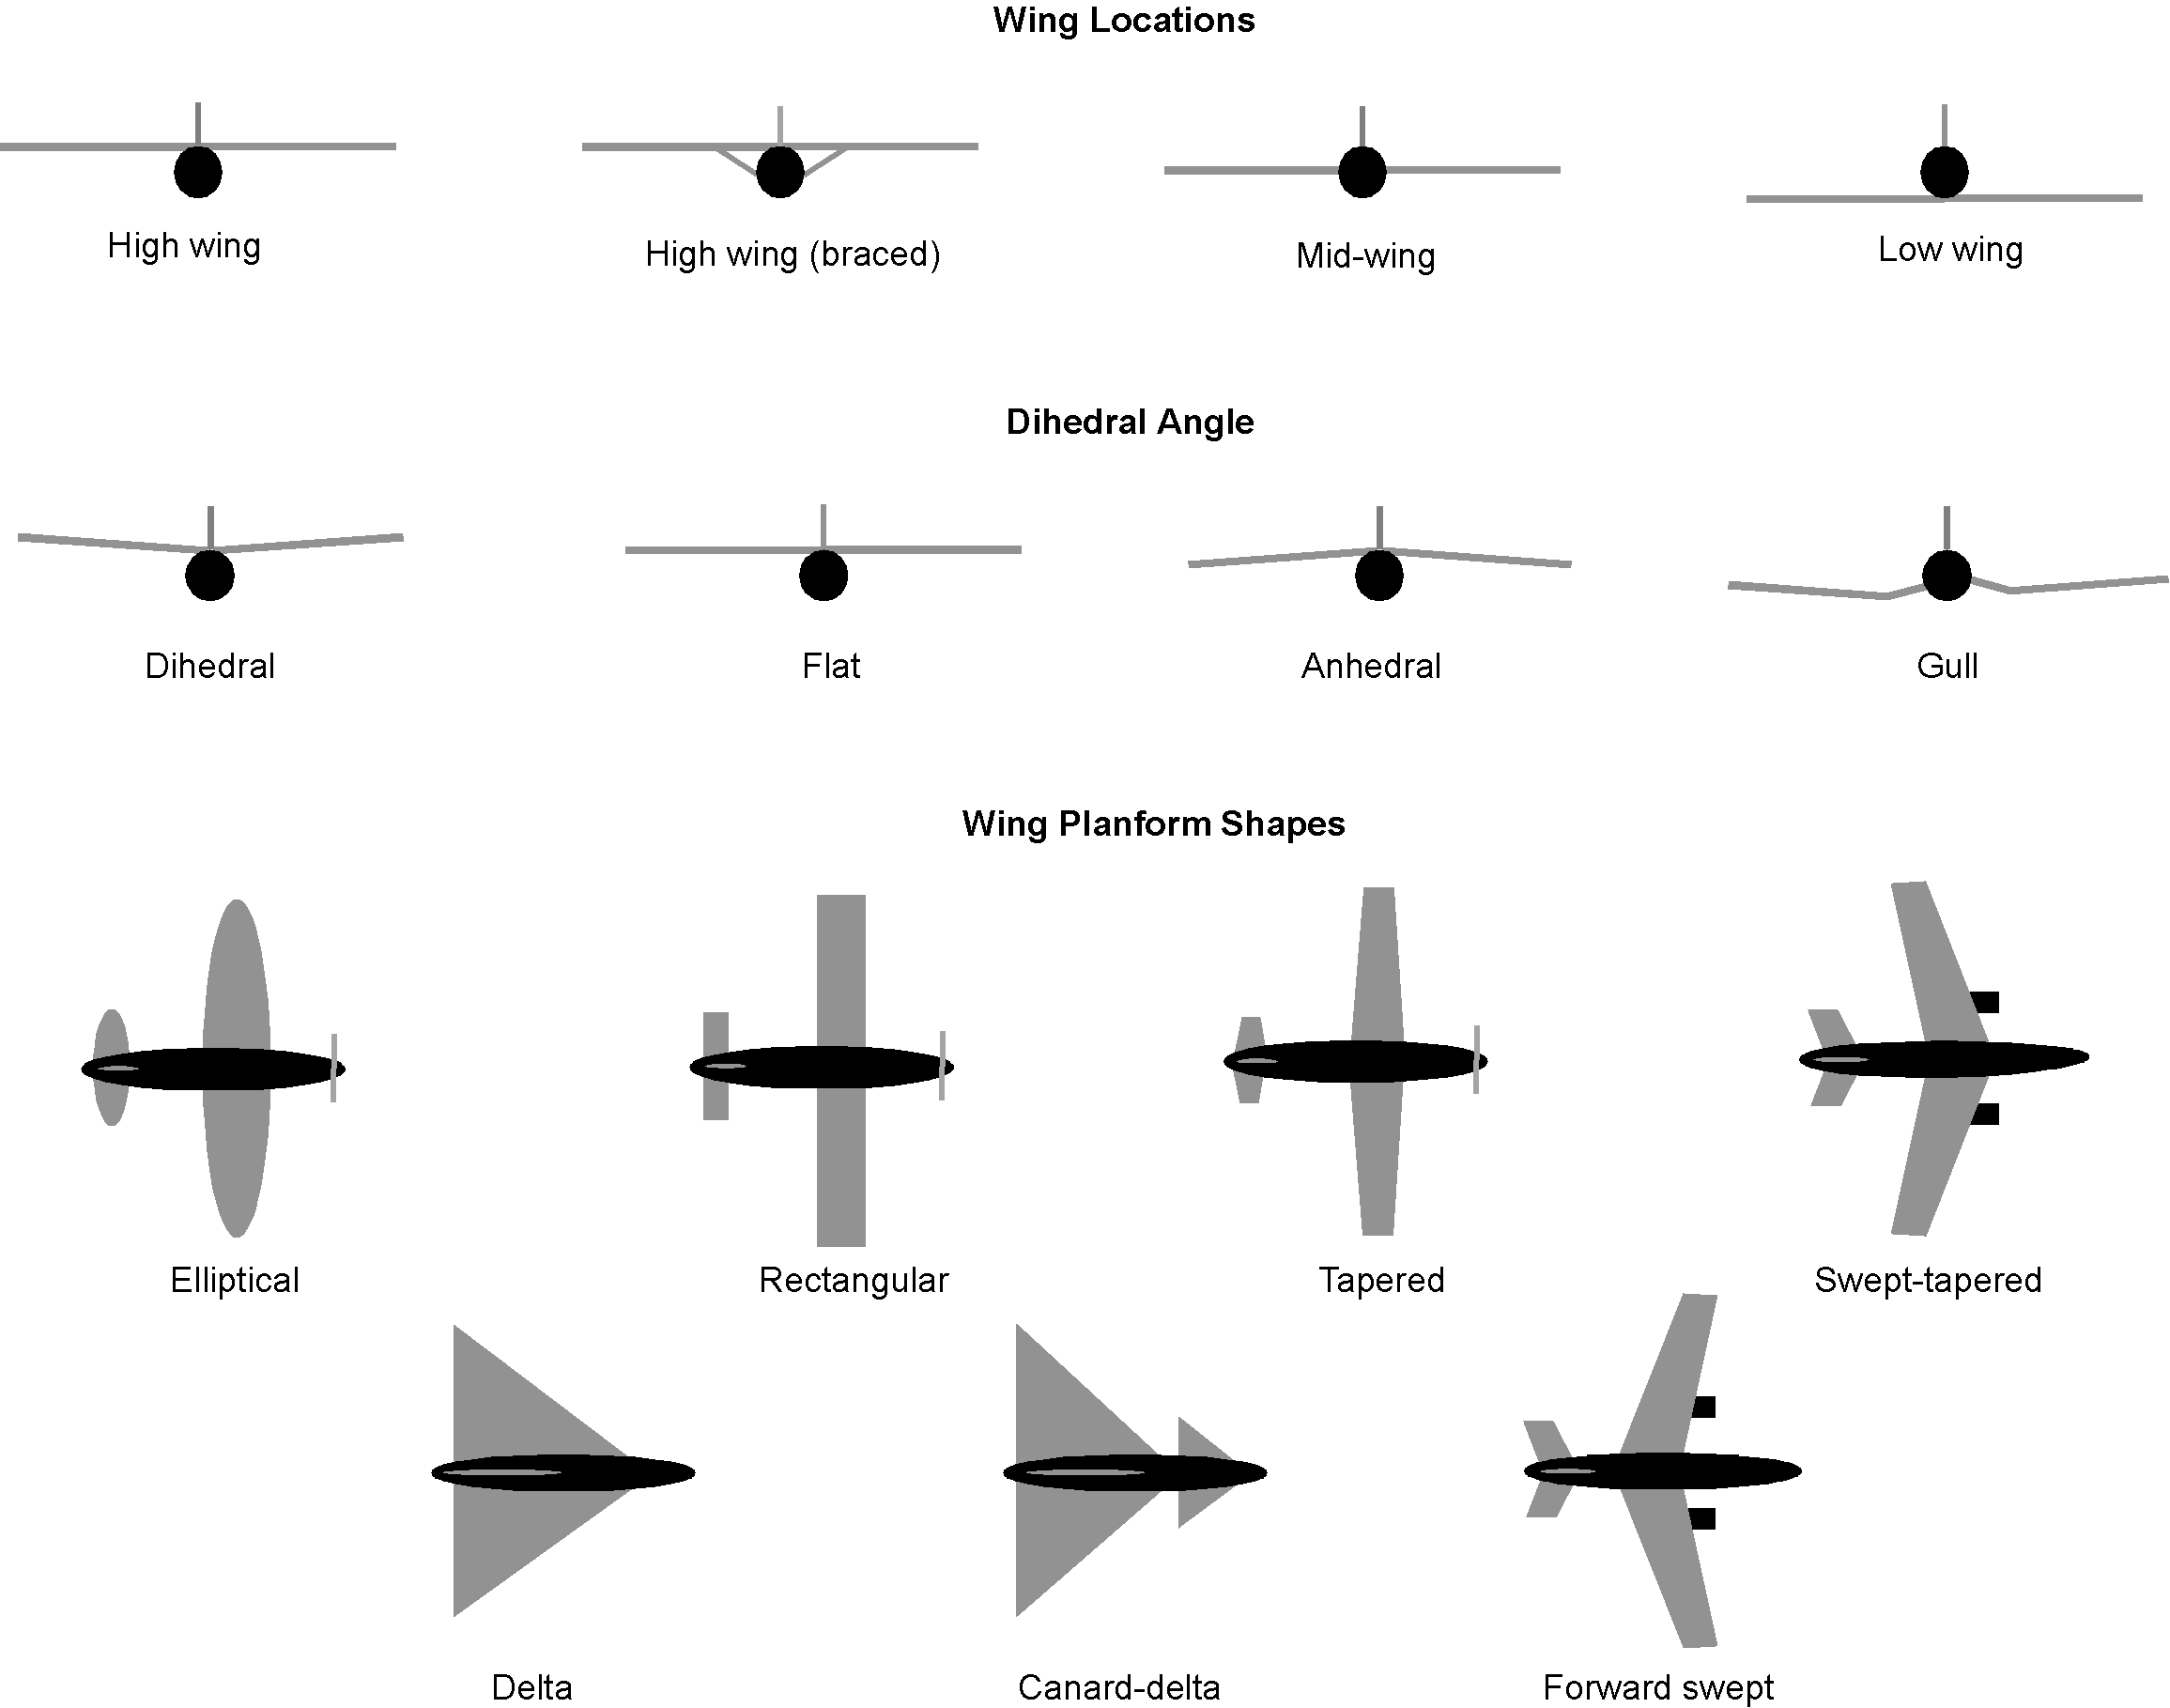 Black and gray diagrams of various wing locations, dihedral angels, and planform shapes available for wings.